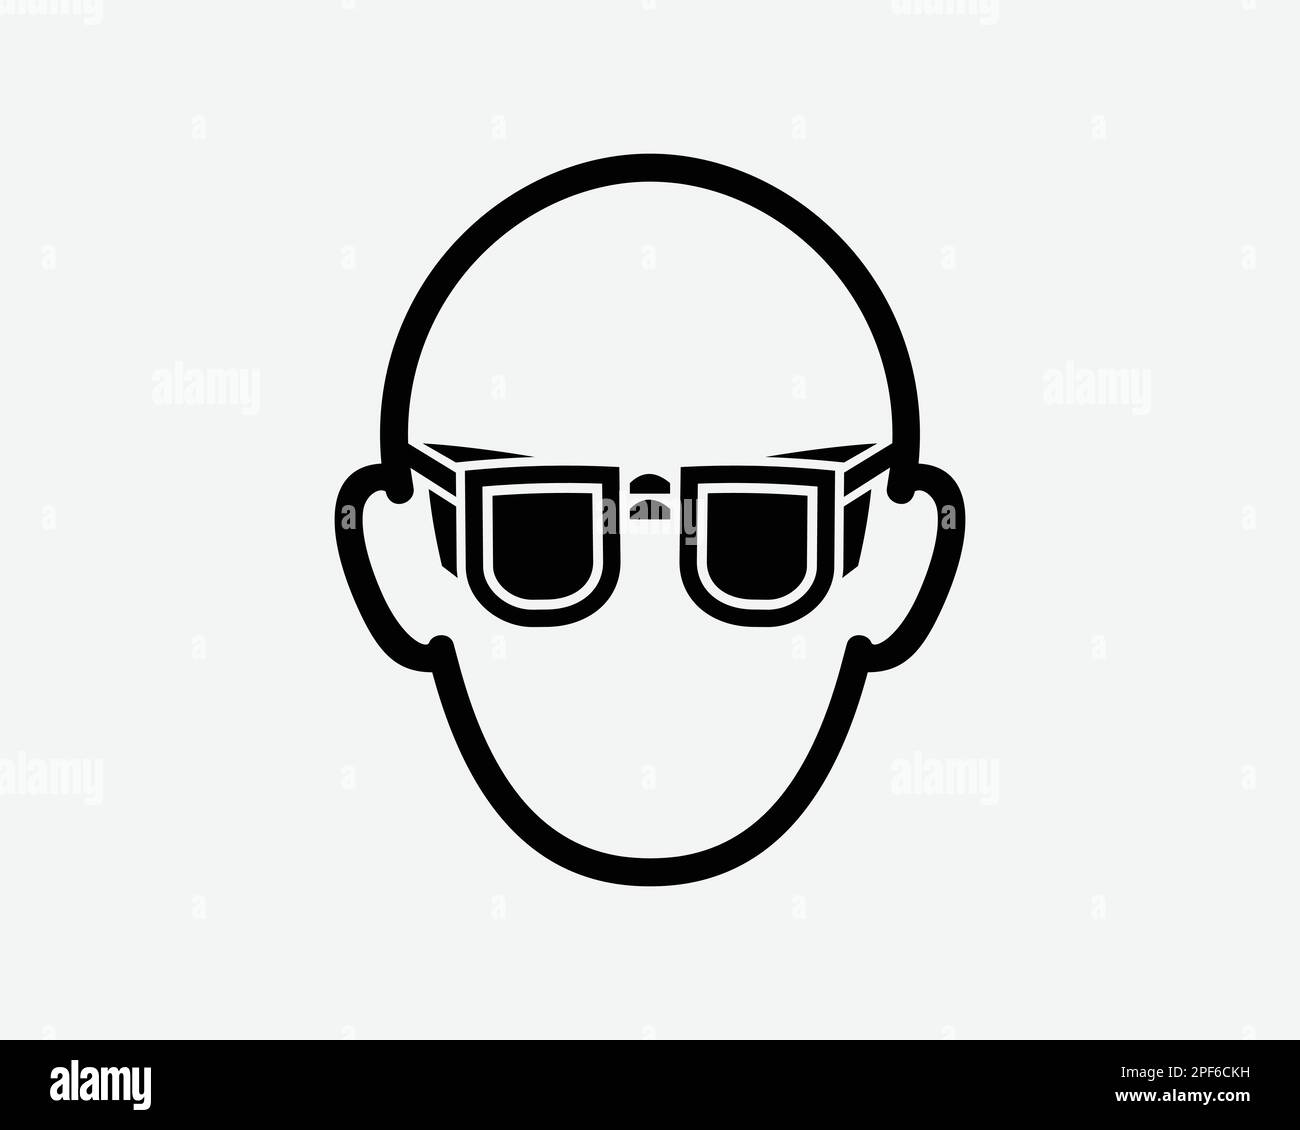 Man Wearing Sunglasses Eye Protection Glasses Goggles Black White Silhouette Sign Symbol Icon Clipart Graphic Artwork Pictogram Illustration Vector Stock Vector